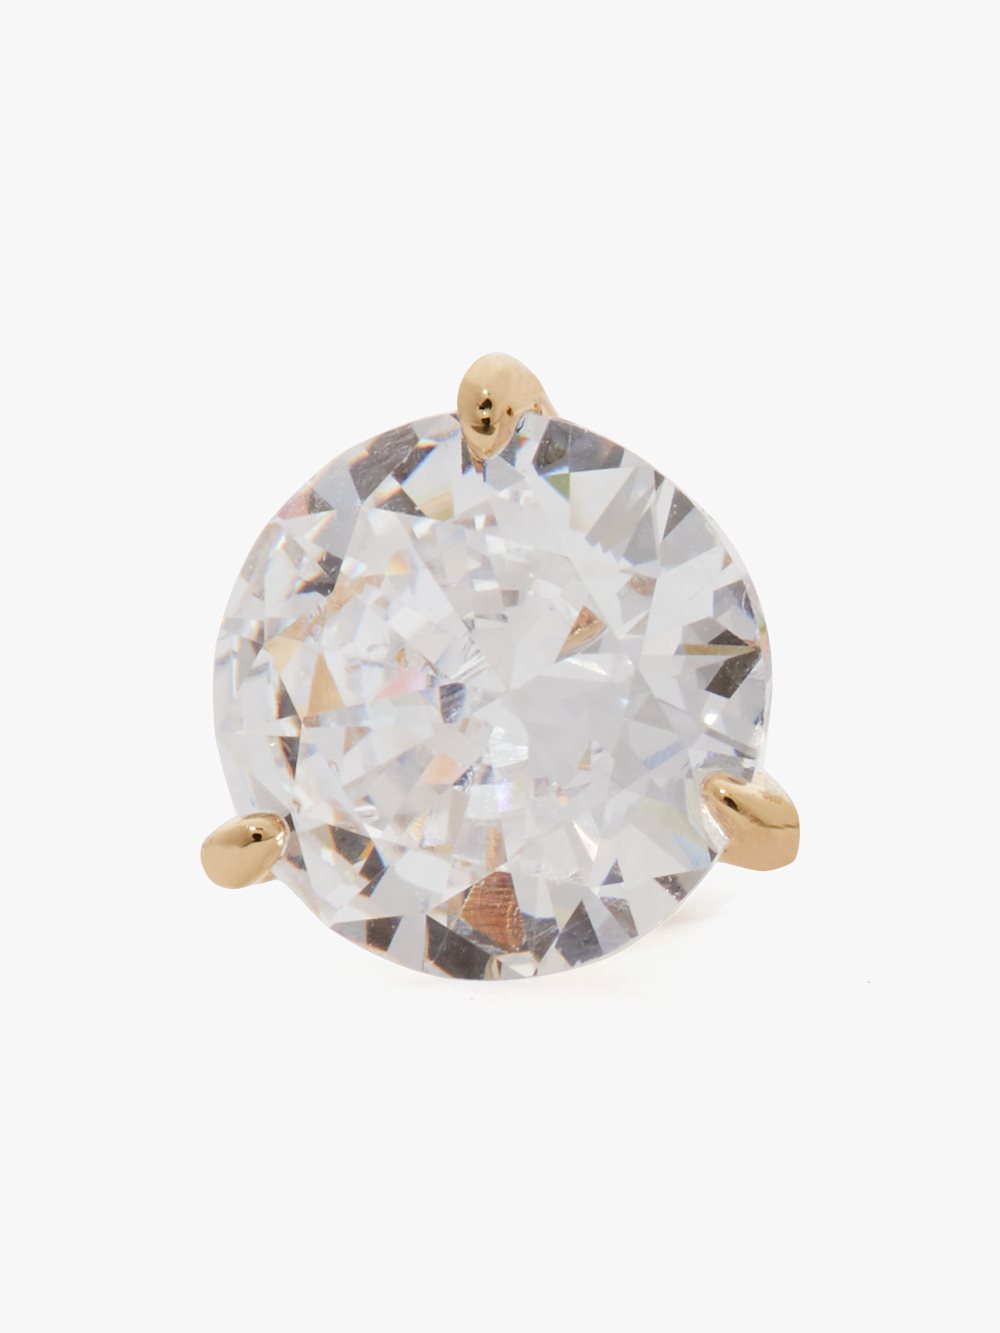 Women's clear/gold brilliant statements tri-prong studs | Kate Spade